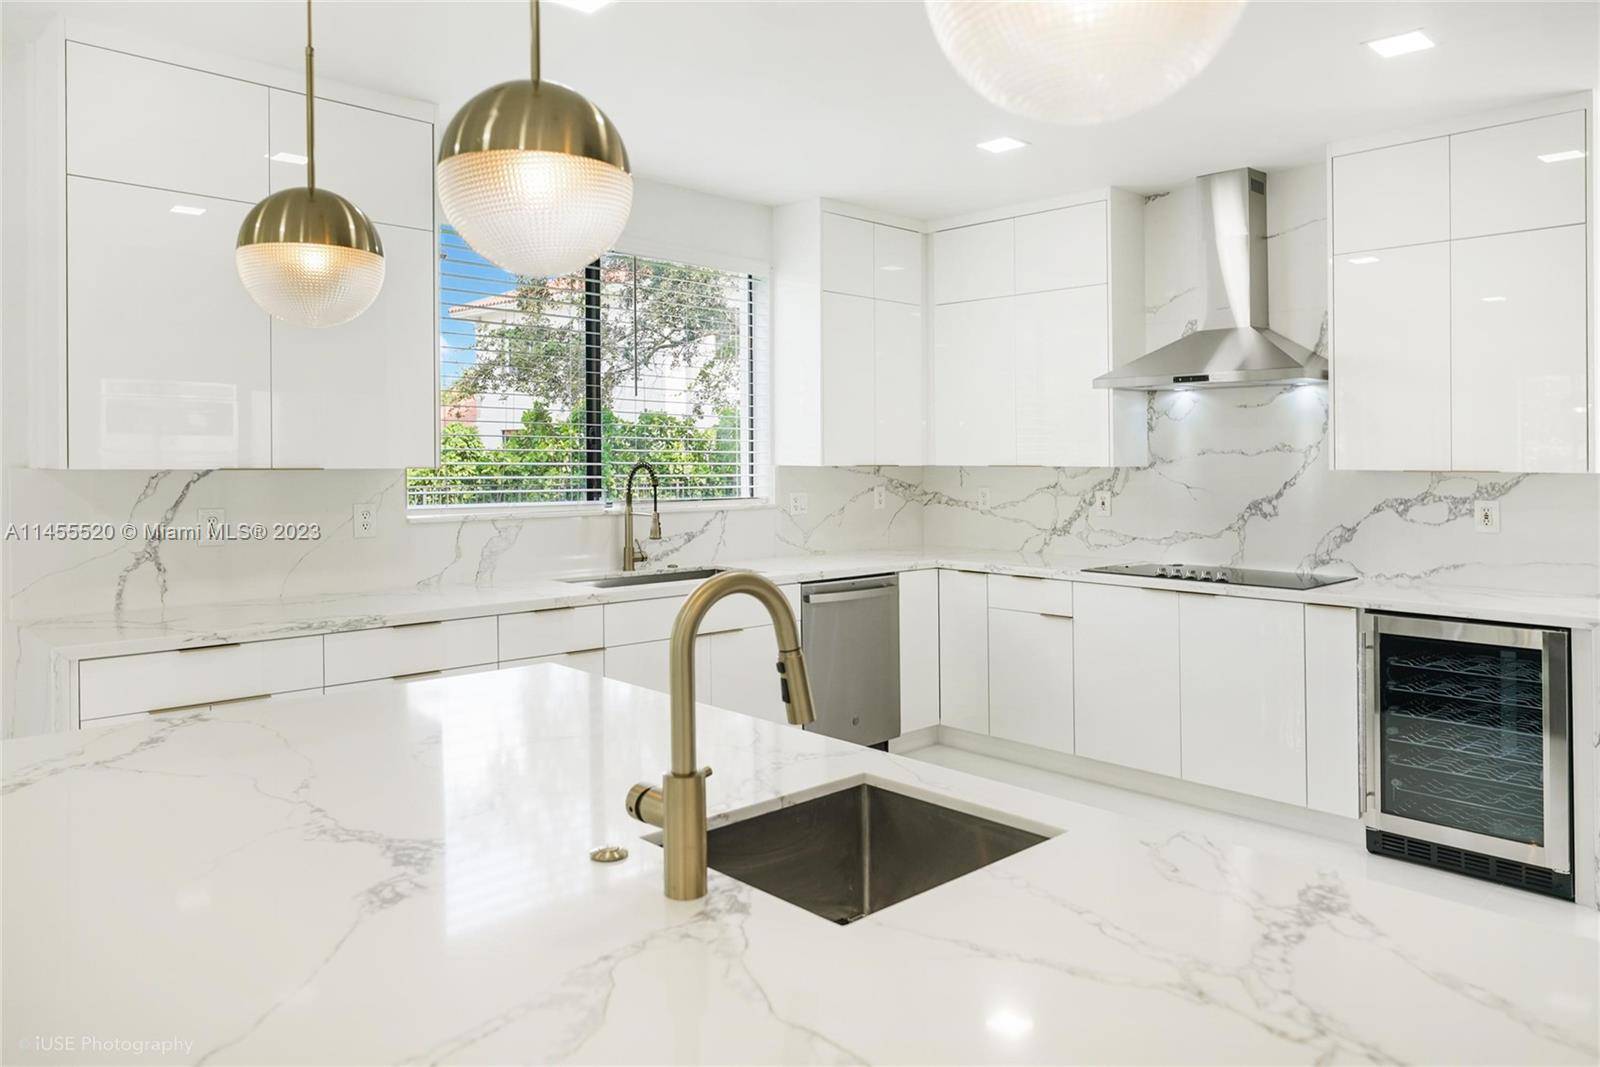 Introducing this spectacular, completely renovated home in the prestigious Cutler Cay community.